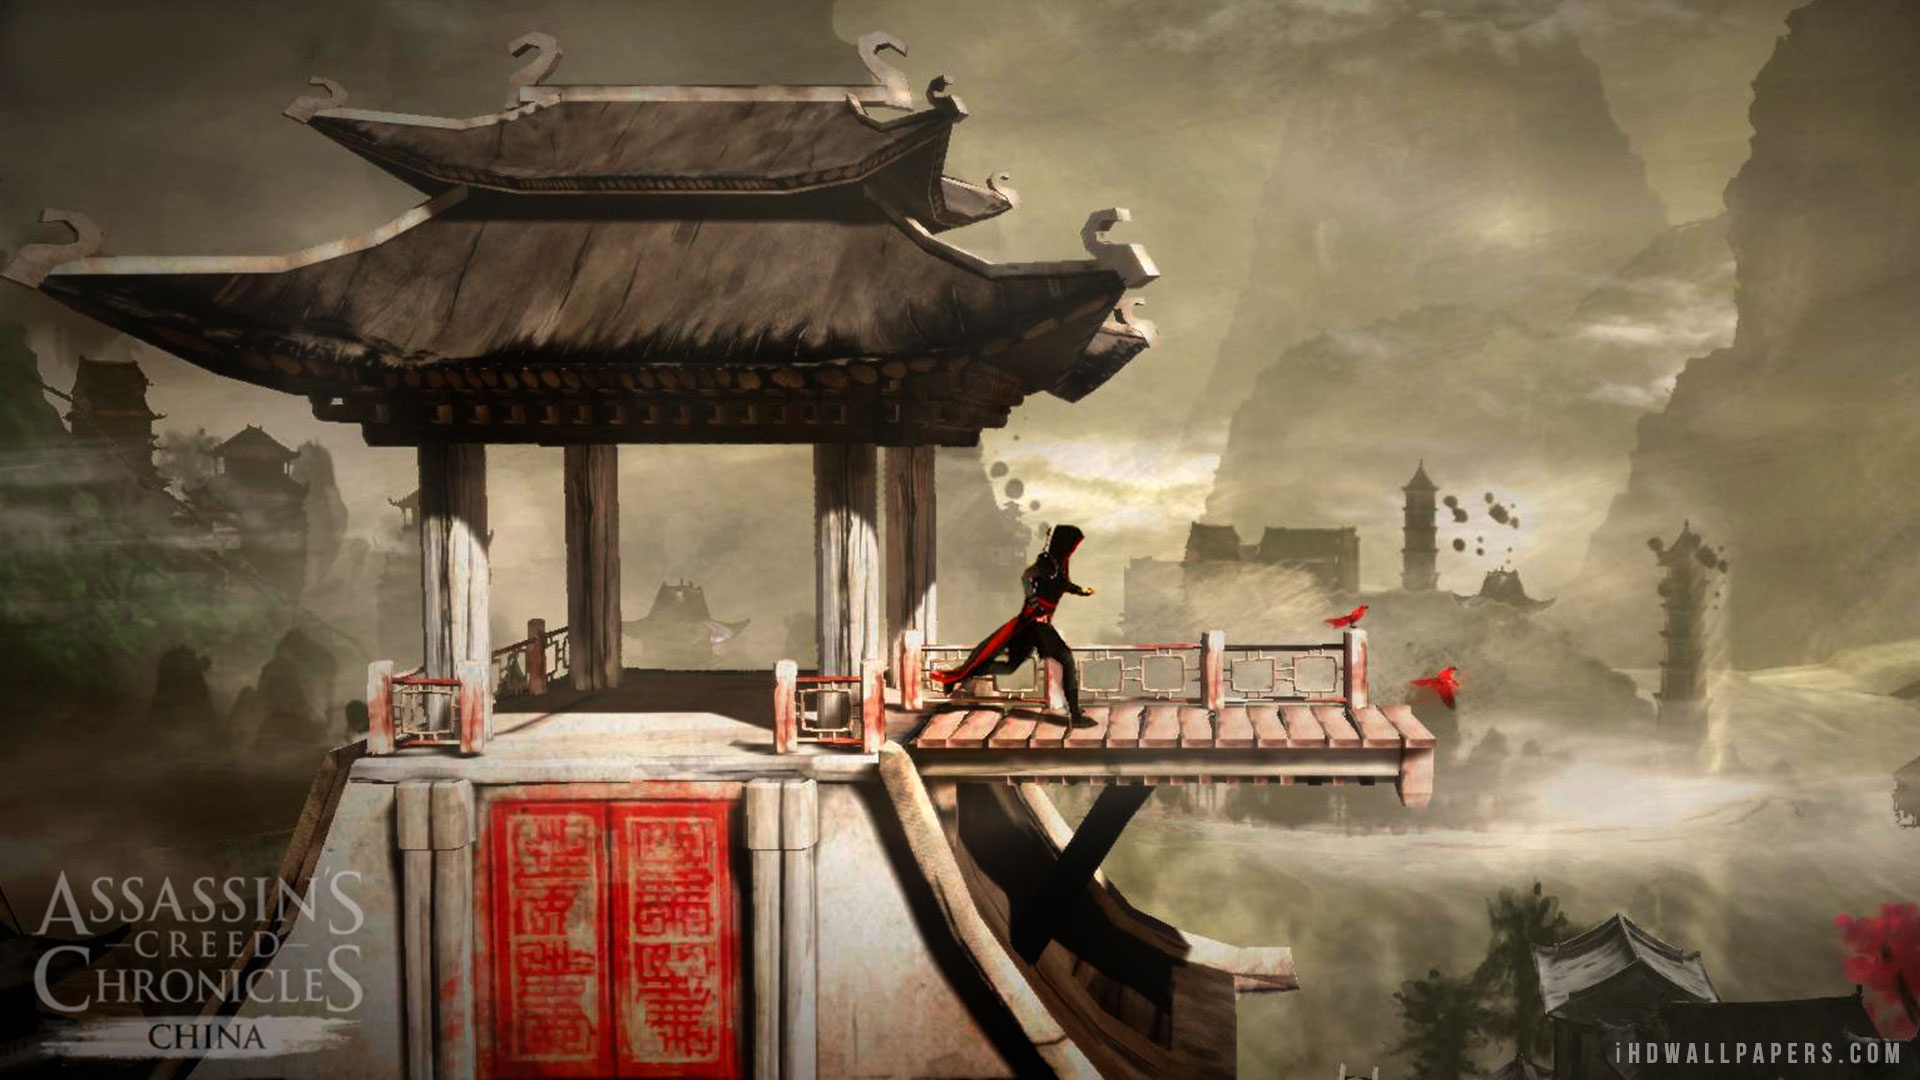 Assassin S Creed Chronicles Explores China Wallpaper From The